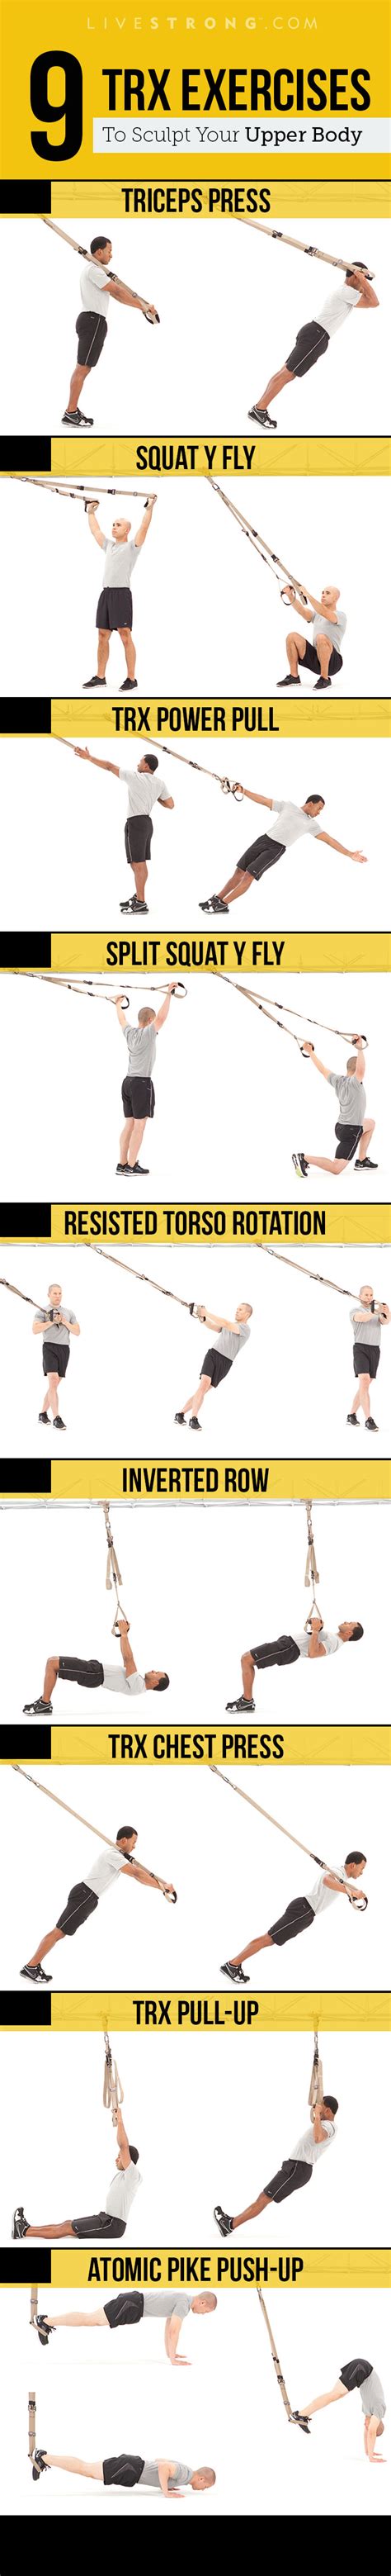 Download Trx Force Workout Guide 